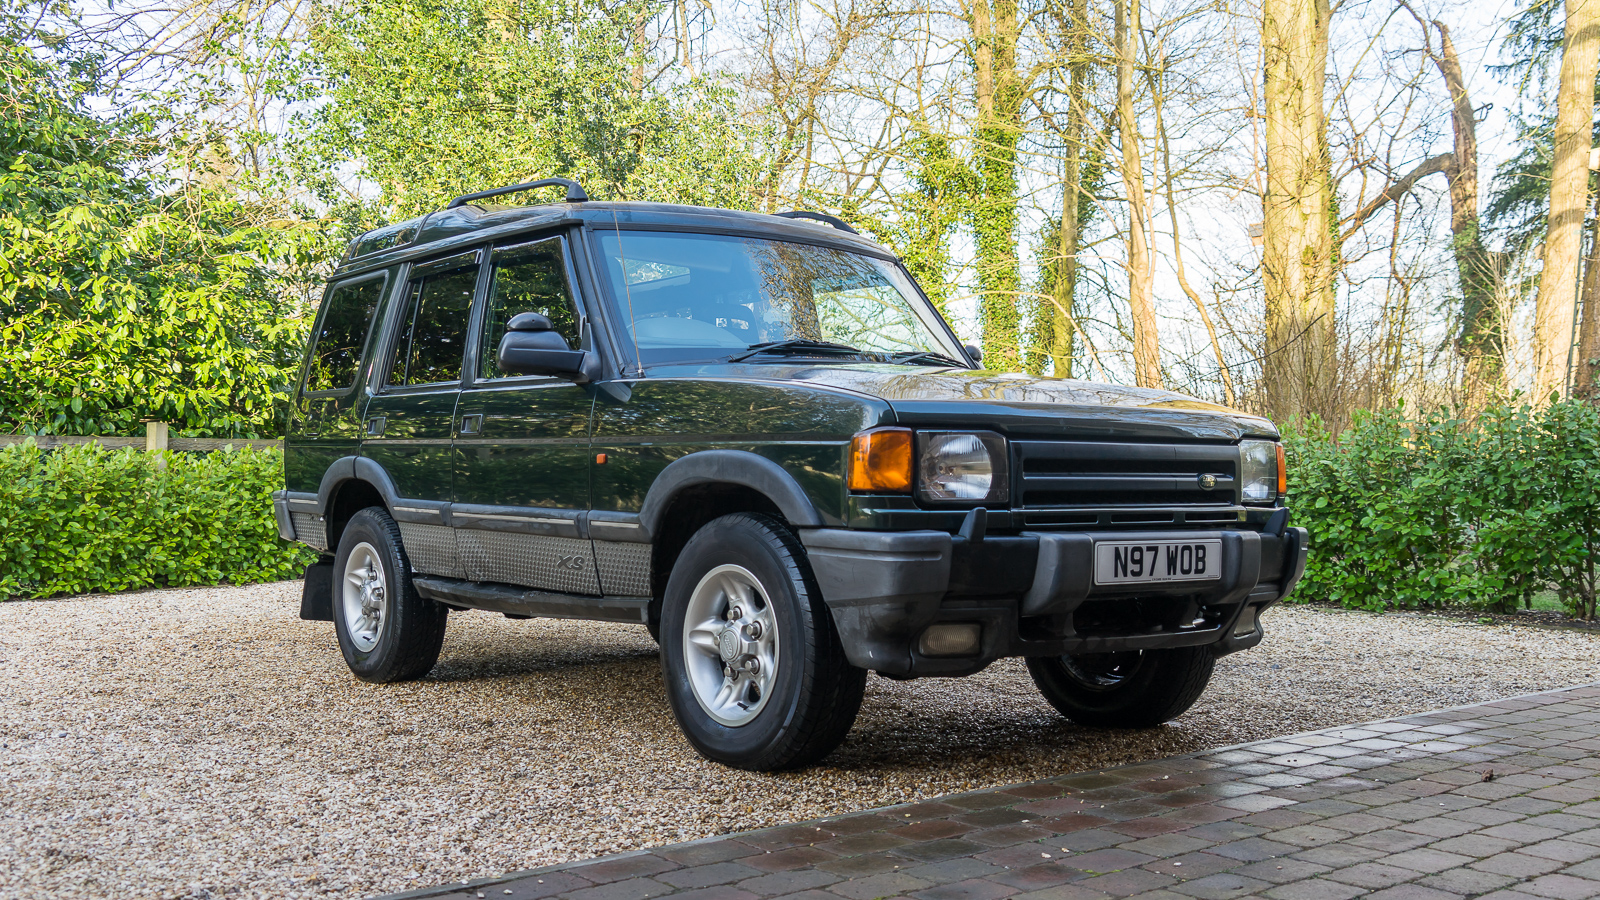 Discovery 1 For sale Discovery 300tdi Auto XS. 12m MOT